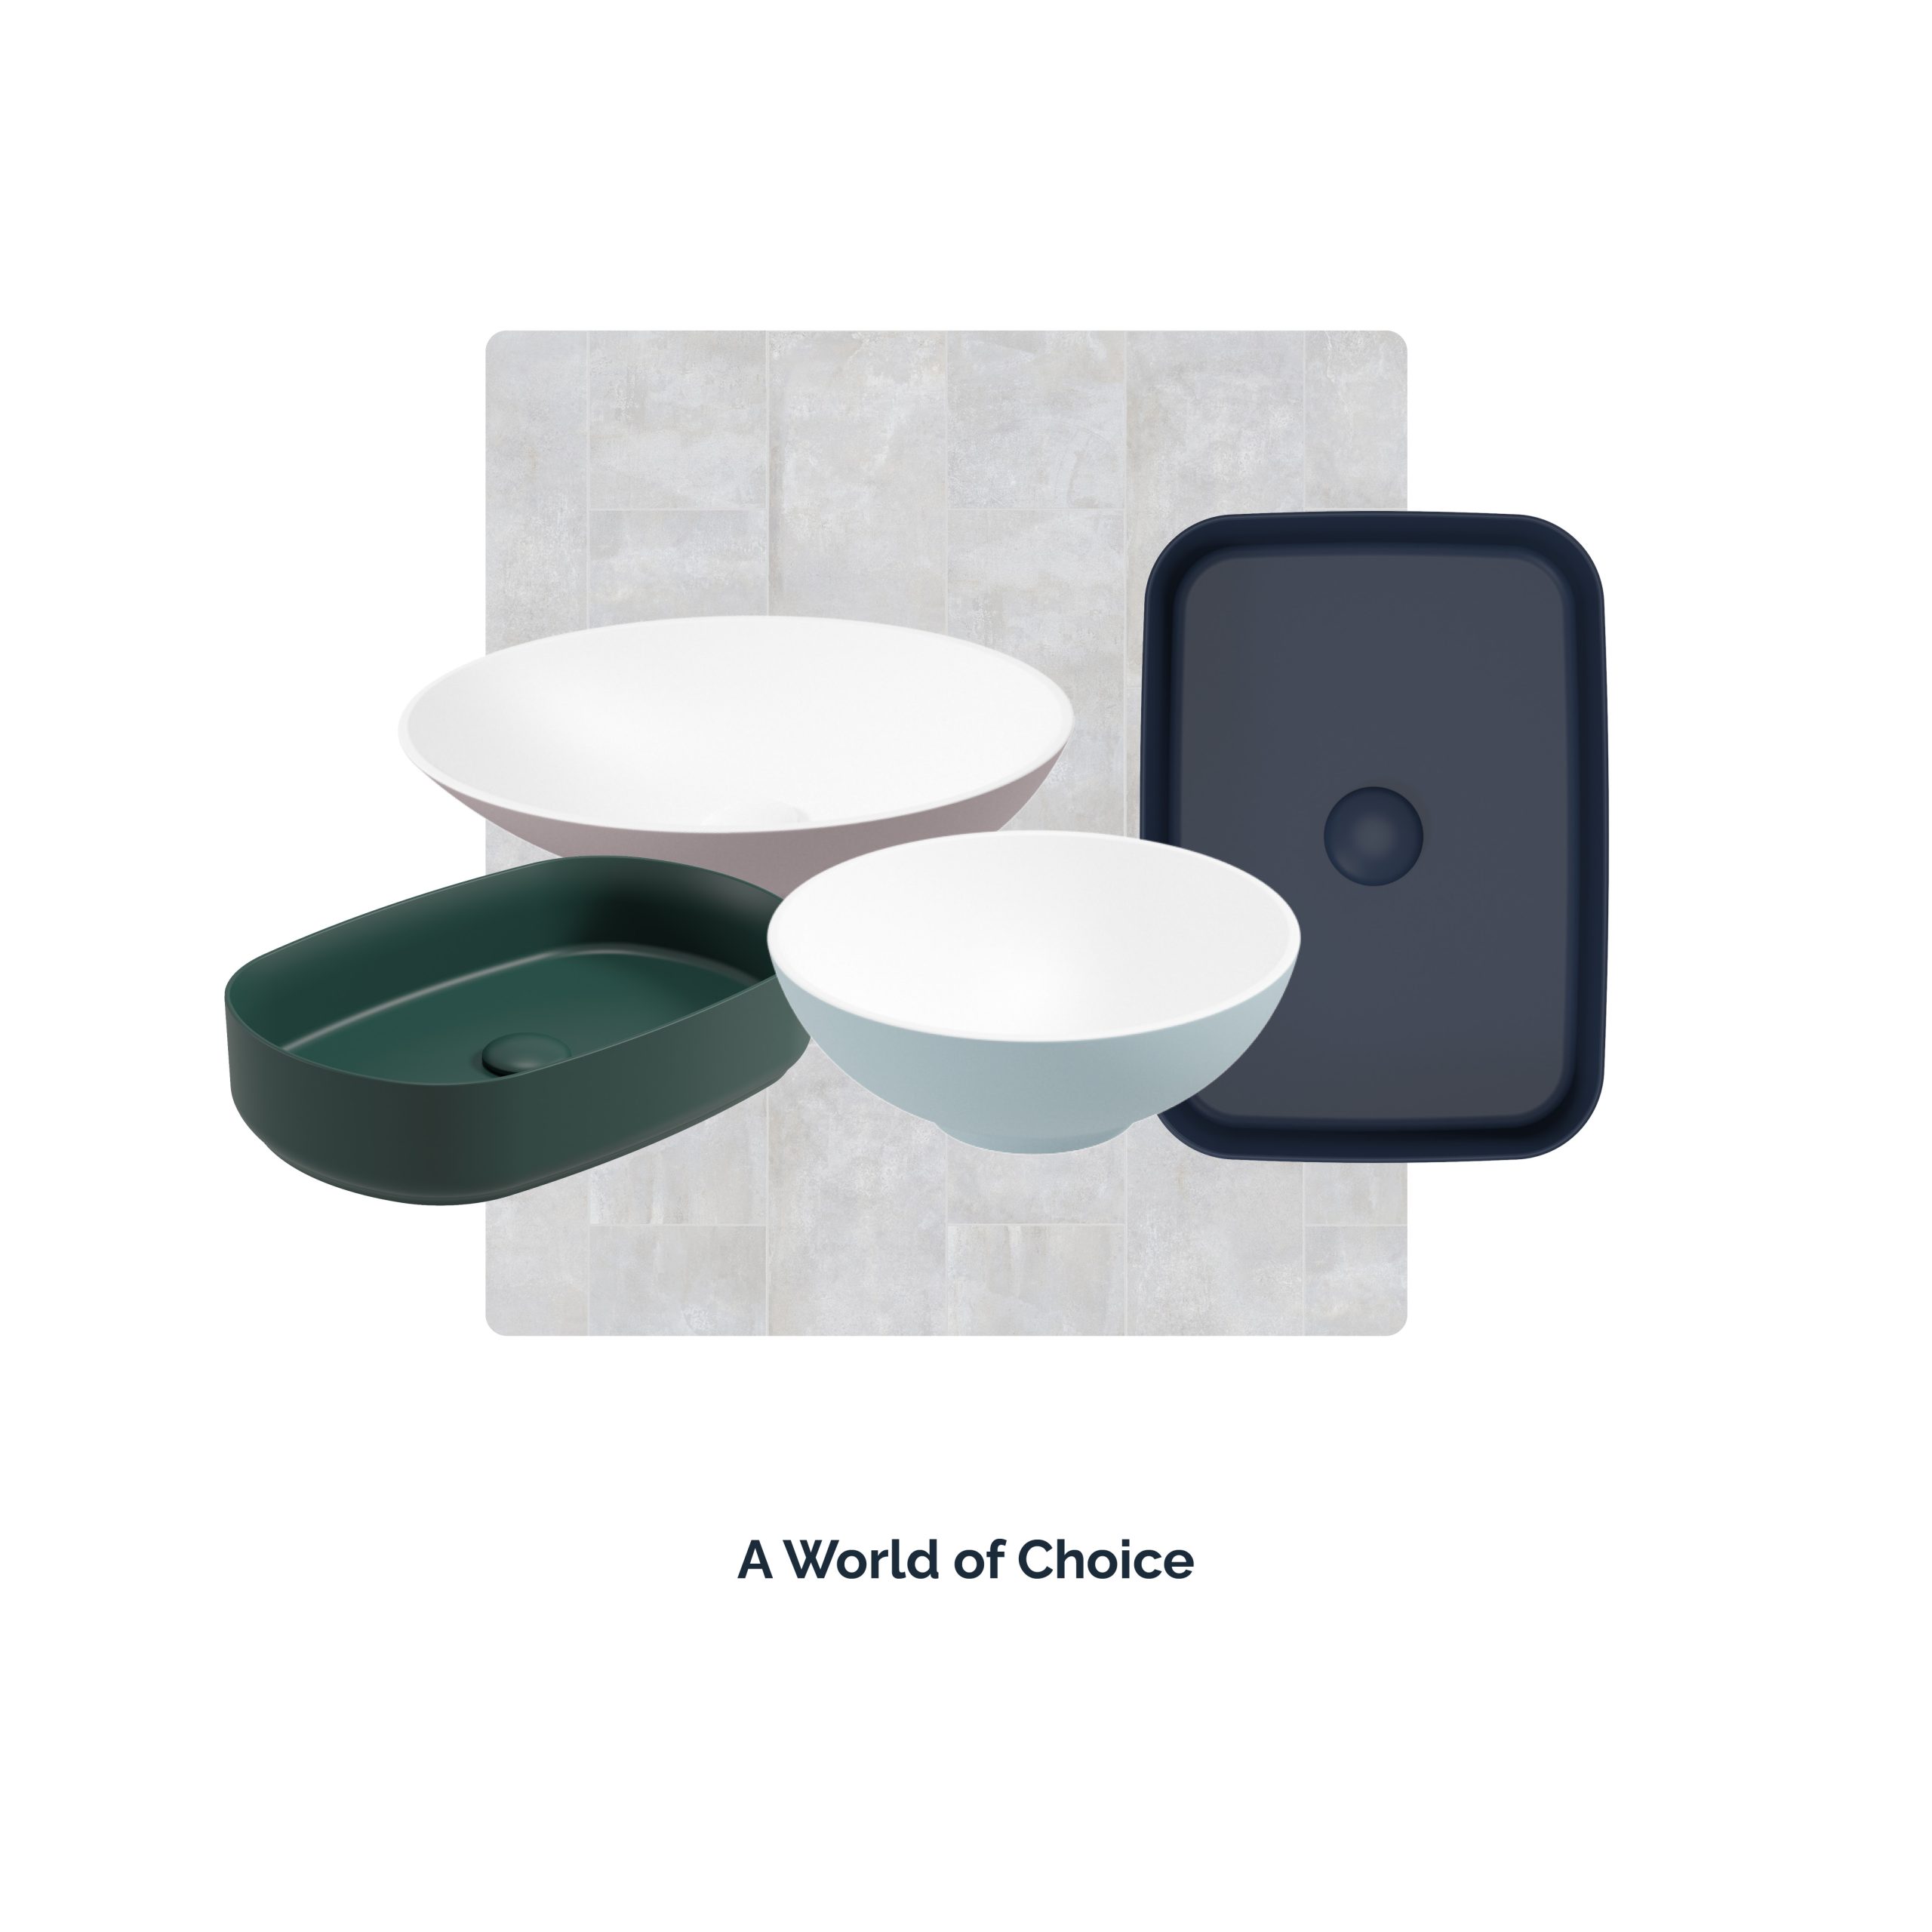 Enhance your bathroom space with a vivid array of colored basins and WC’s.